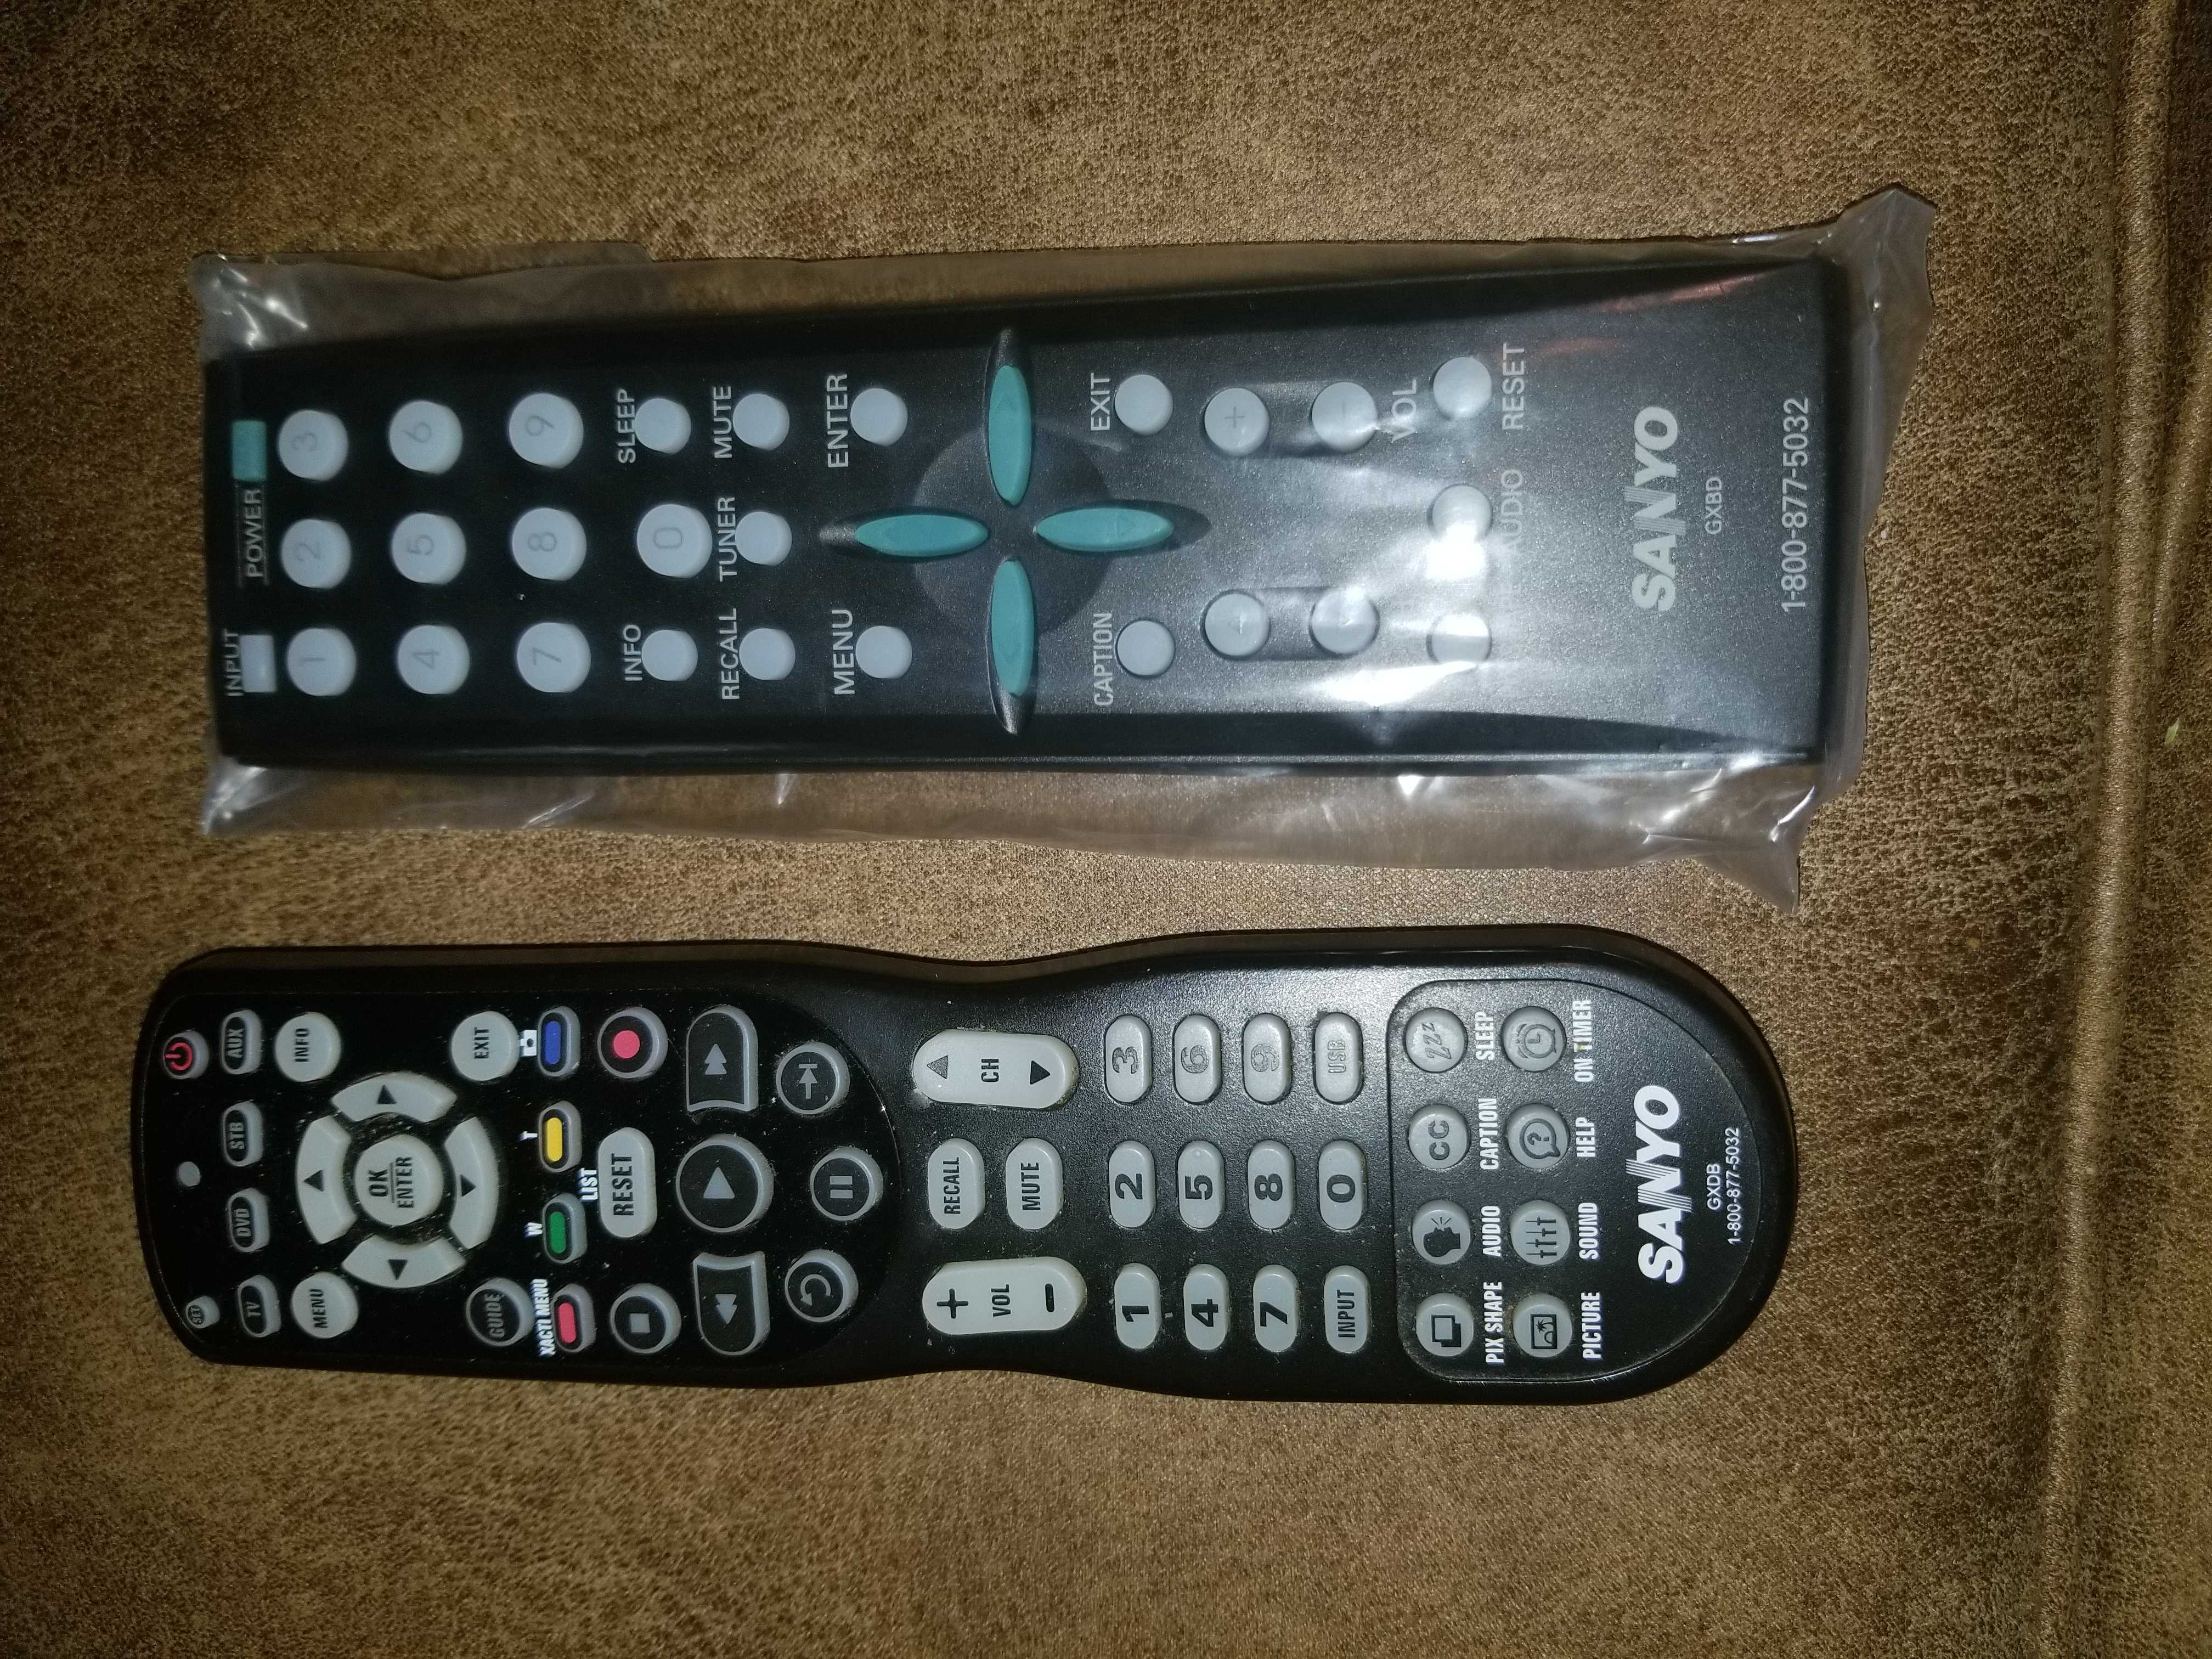 Orginal Remote on Left - Replacement on right